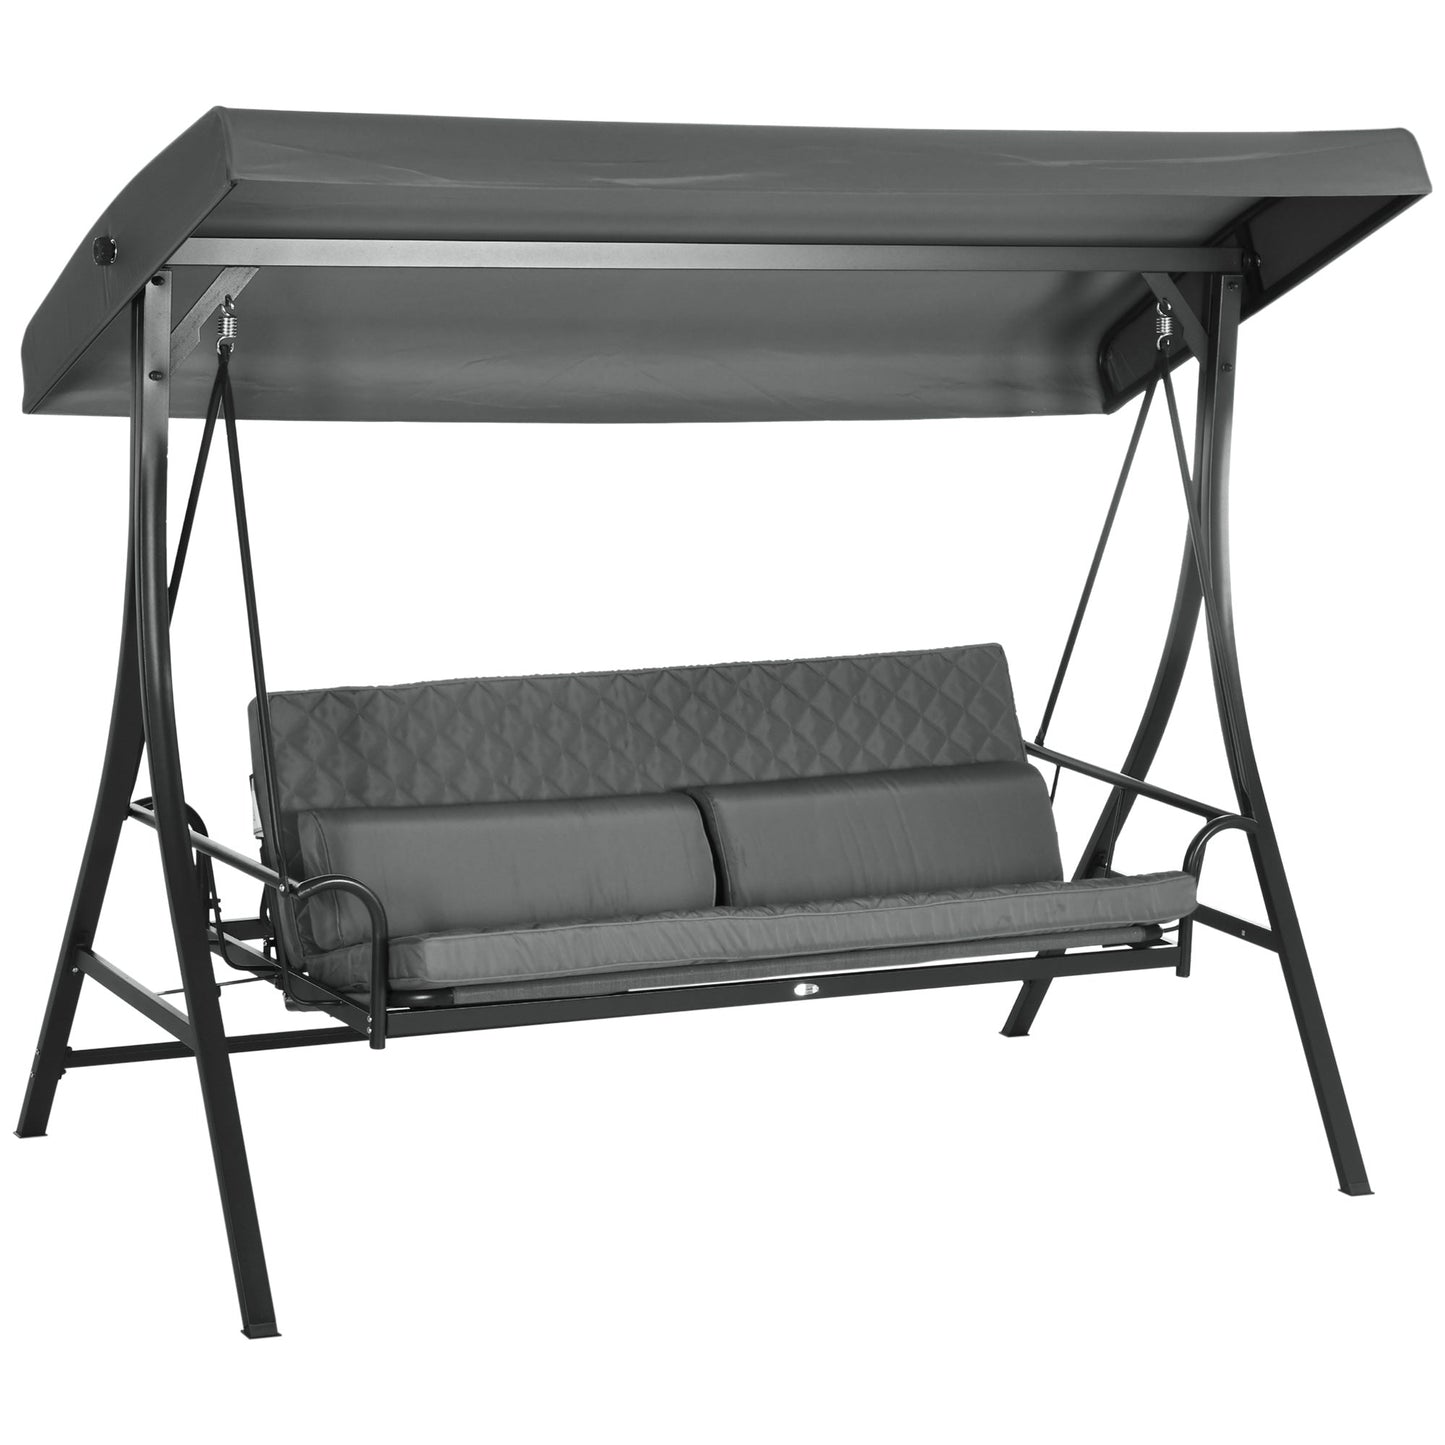 Outdoor and Garden-3 Person Porch Swing Bed, Outdoor Patio Swing Chair Bench Hammock with Adjustable Canopy, Cushions, Pillows, Dark Gray - Outdoor Style Company